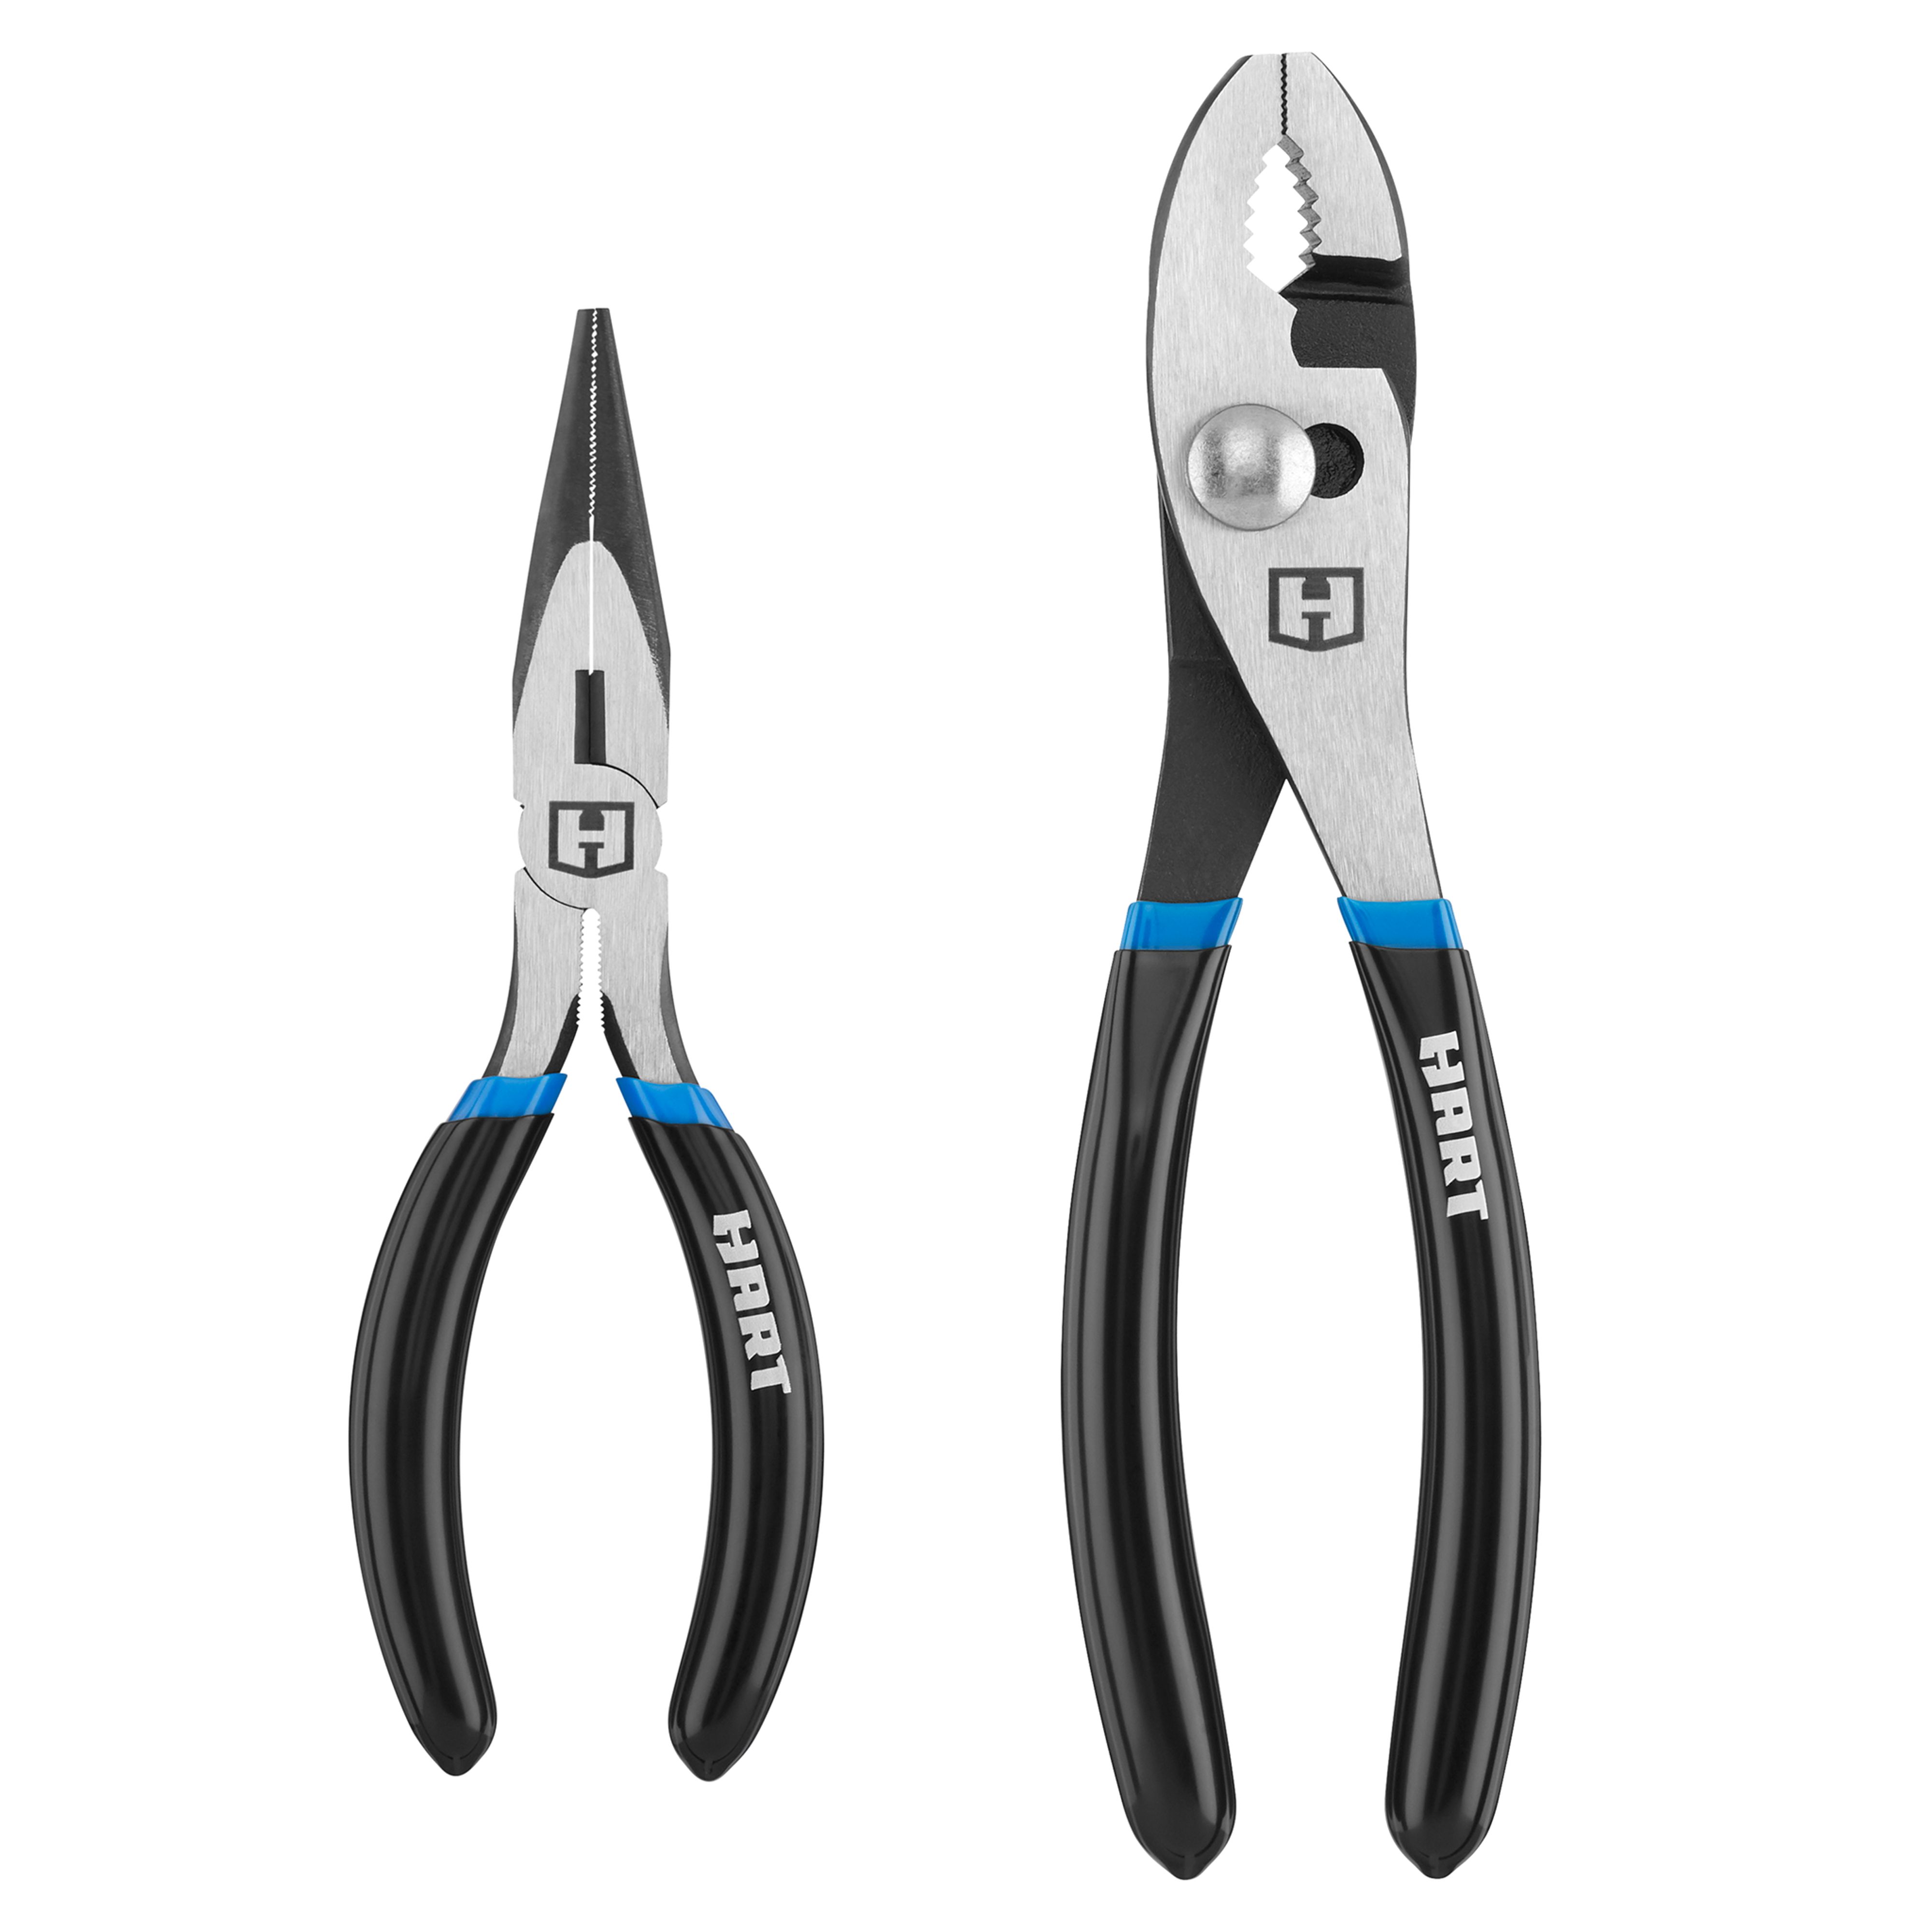 HART 2-Piece Pliers Set, 6-inch Long Nose, 8-inch Slip Joint - image 1 of 11